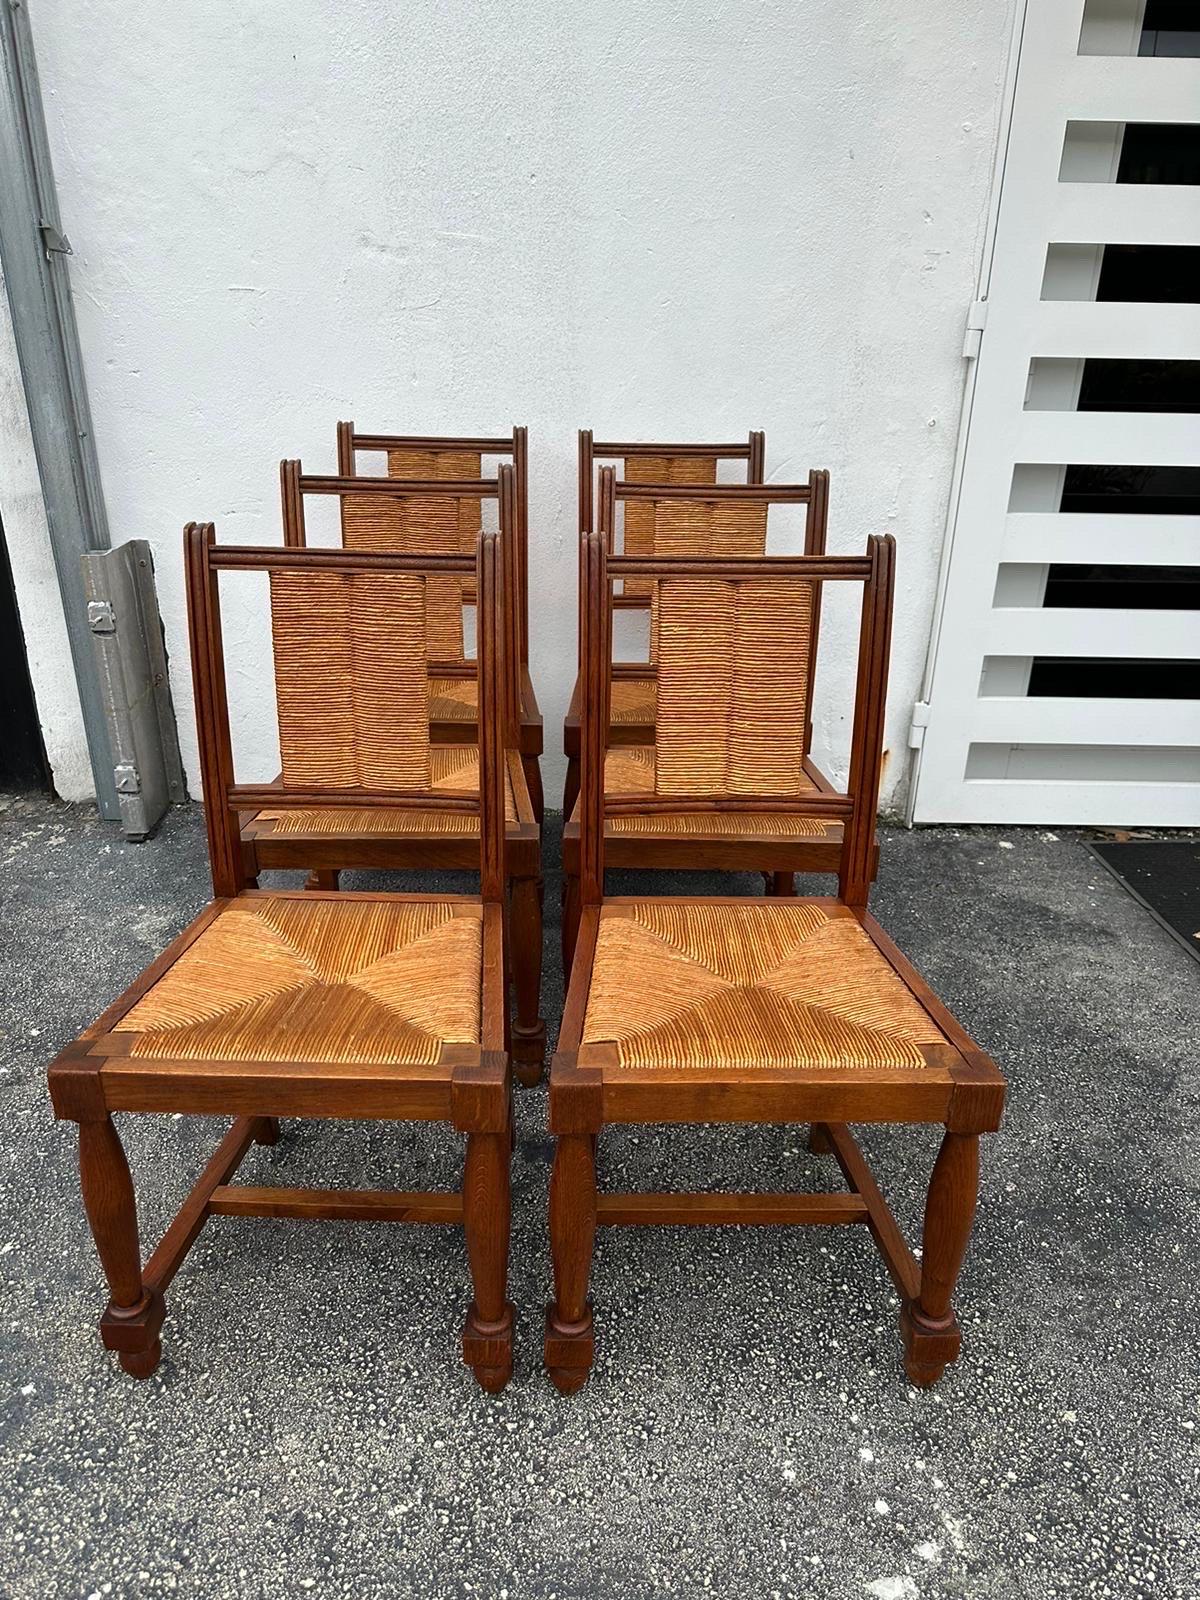 Vintage Walnut and rush seat dining chairs by Charles Dudouyt, France 1940s.  Dudouyt crafted wooden furniture in strong Art Deco/ brutalist forms, using playful geometries and construction methods more in keeping with the robust Arts and Crafts